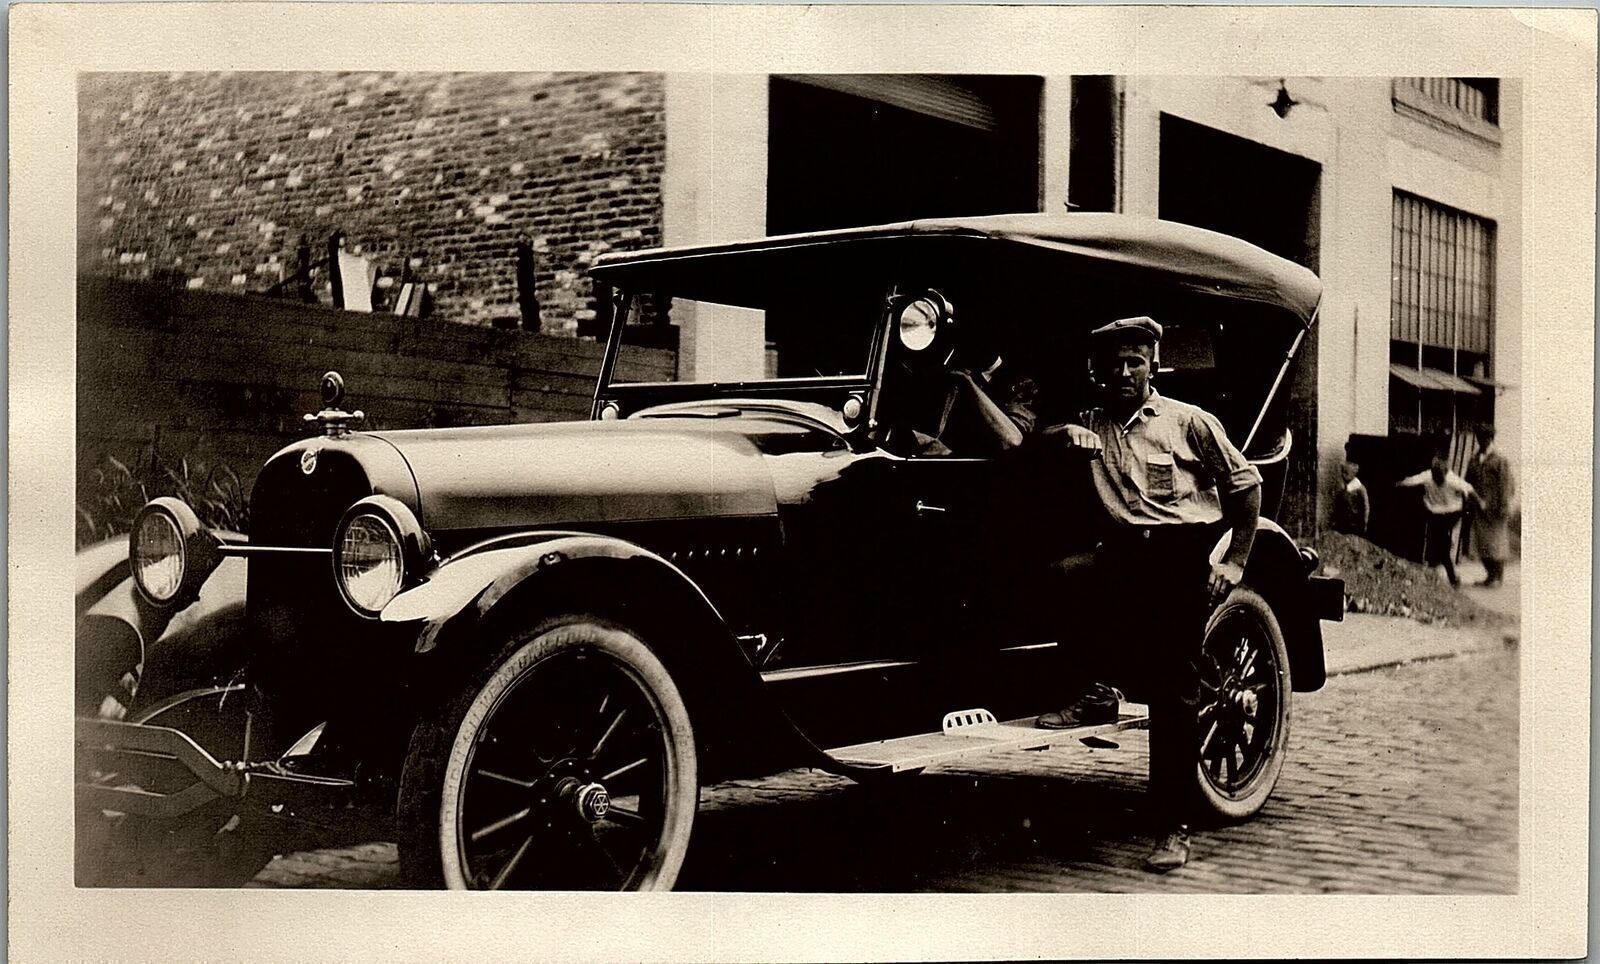 c1920 WINTON 6-CYL TOURING FACTORY/DEALERSHIP MECHANIC REAL PHOTOGRAPH 34-42